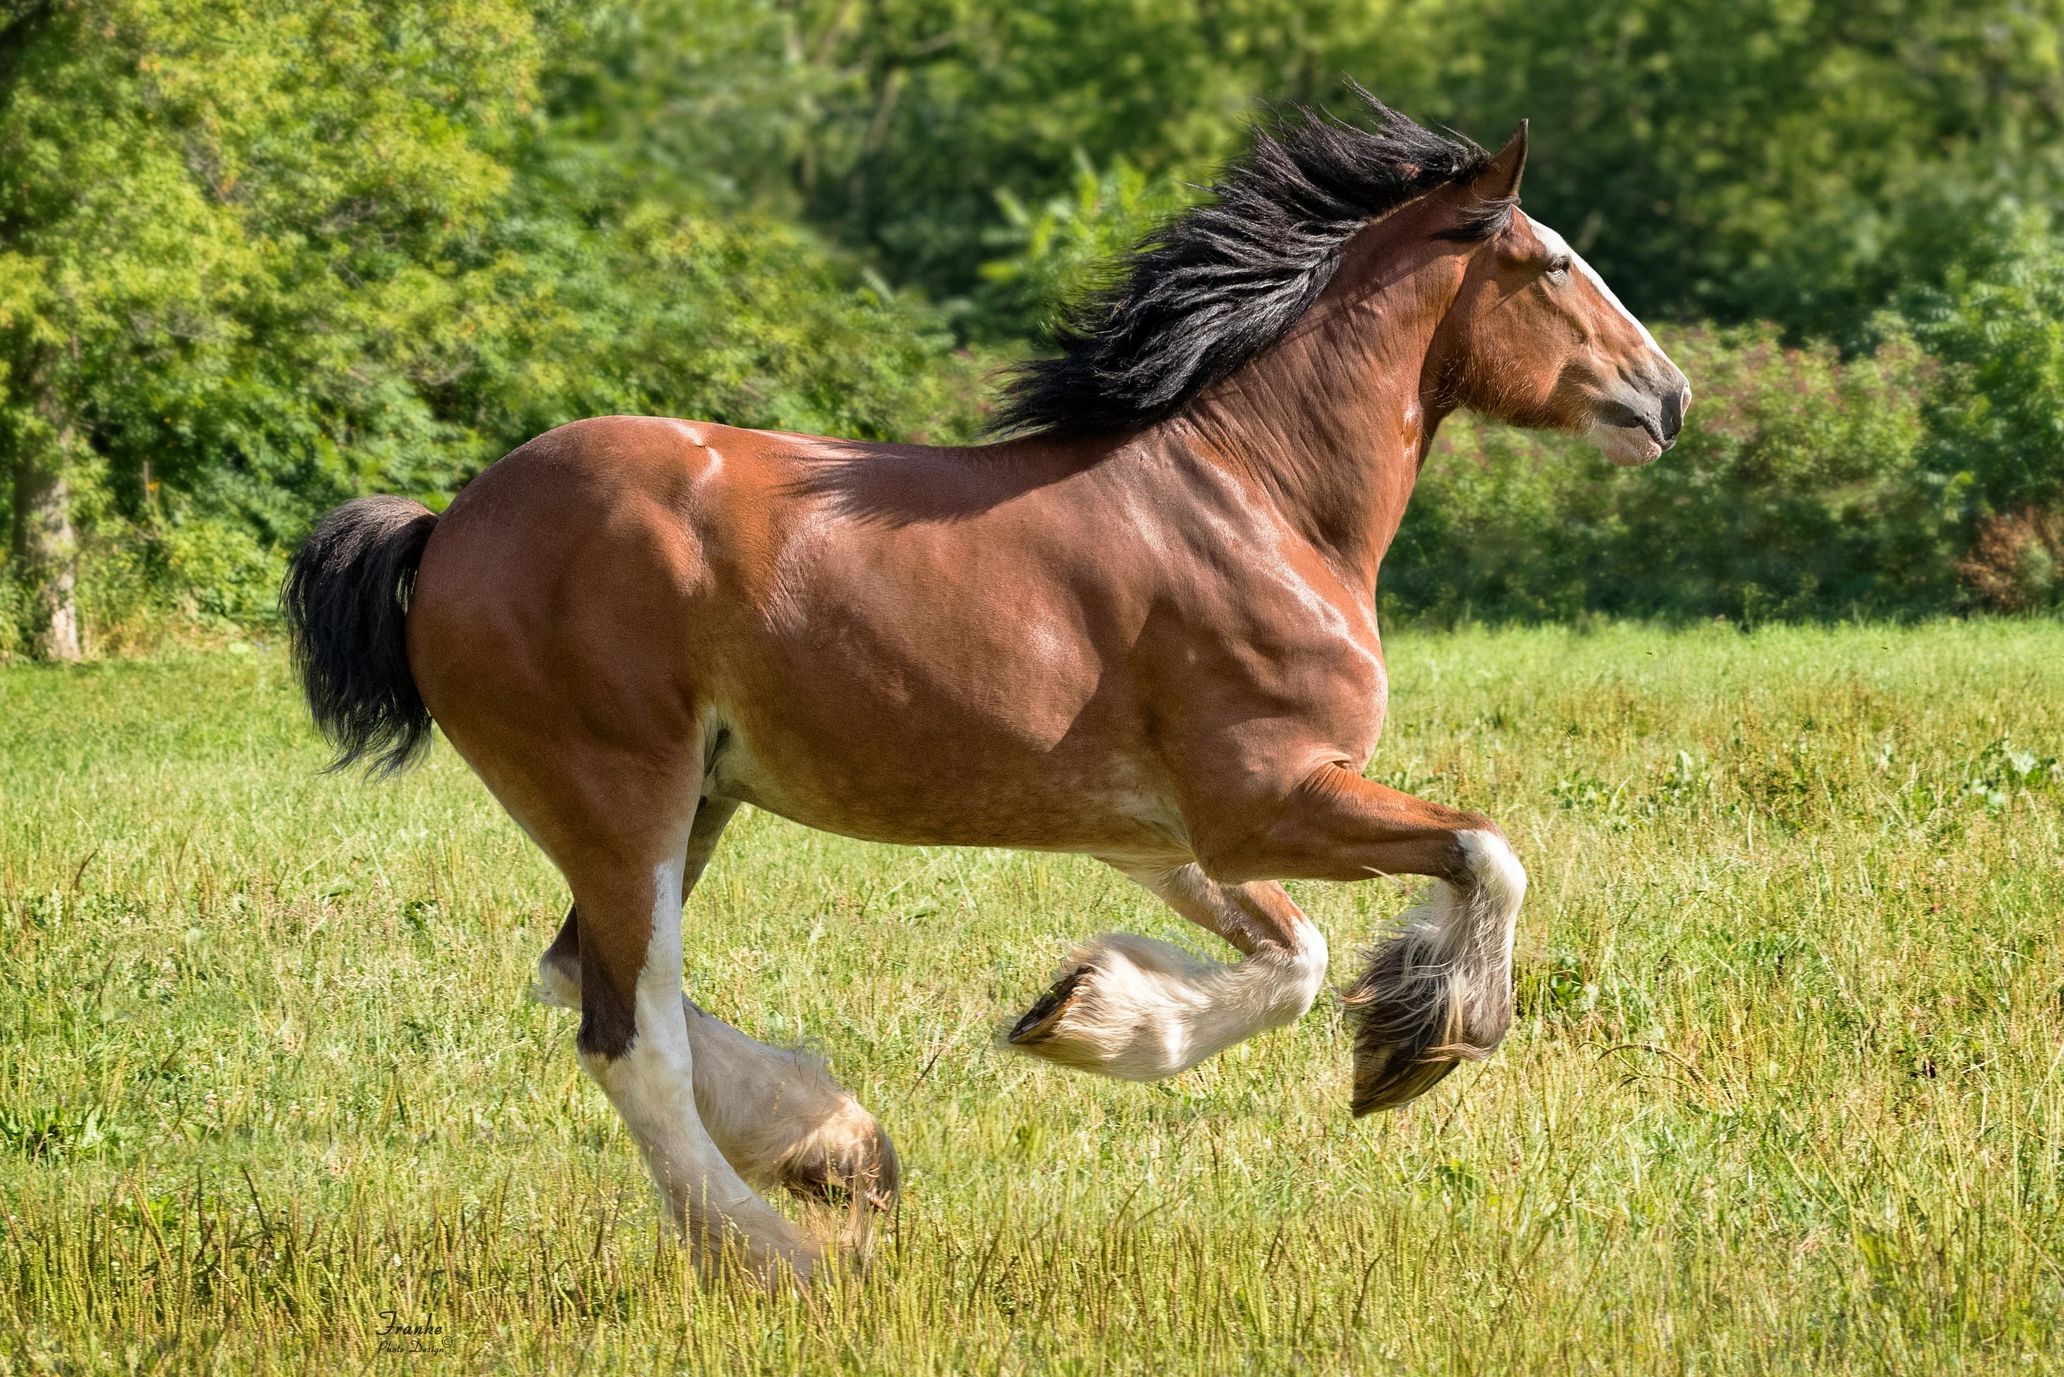 Clydesdale running through a grassy field